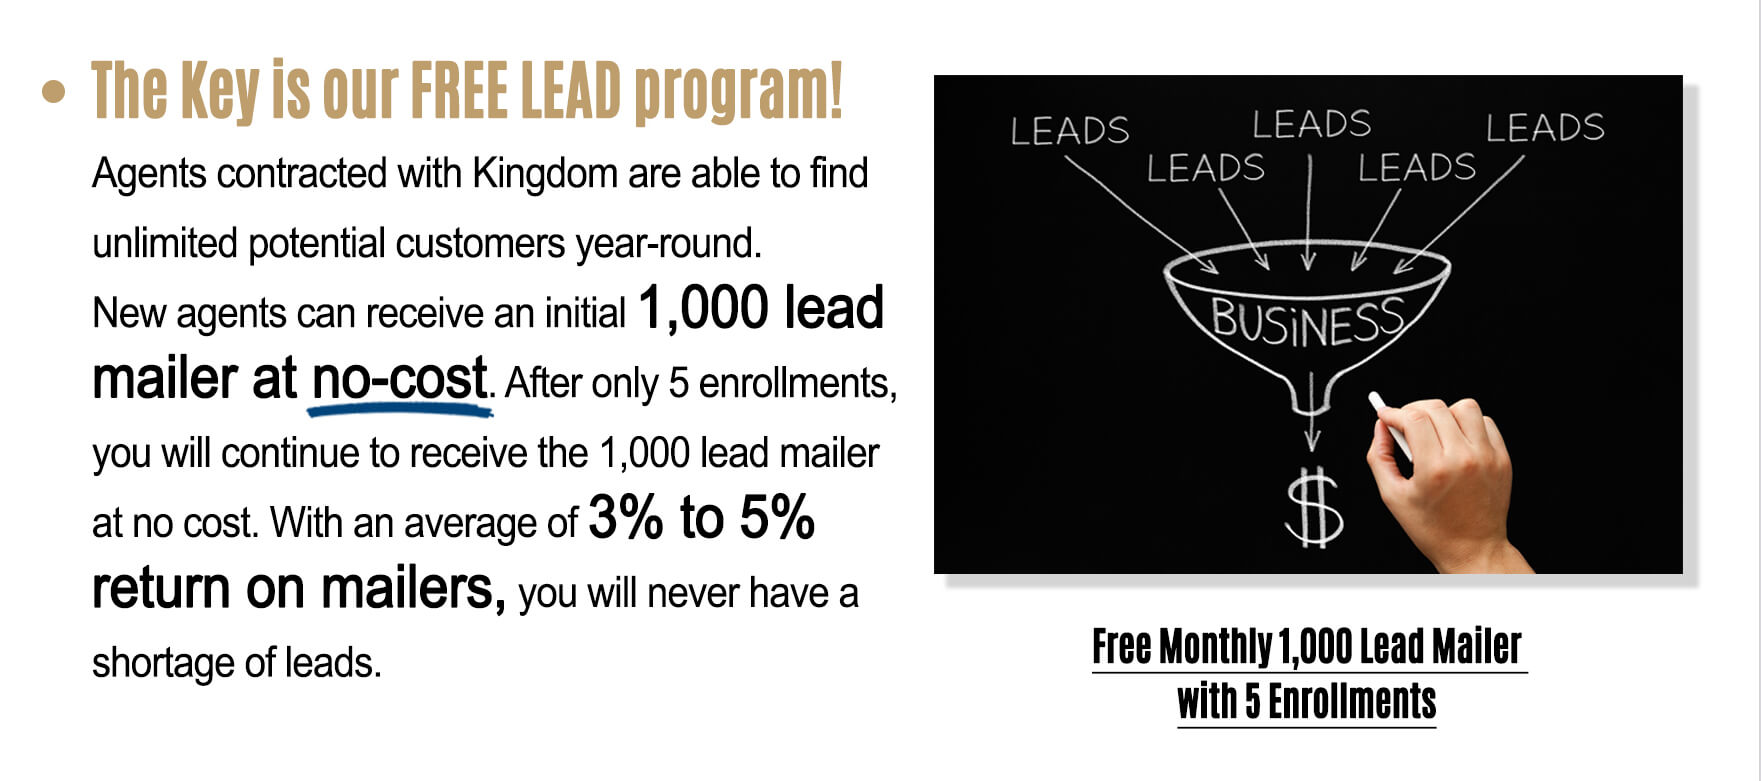 The key is our FREE LEAD program! Agents contracted with Kingdom are able to find unlimited potential customers year-round. New agents can receive an initial 1,000 lead mailer at no-cost. With an average of 3% to 5% return on mailers, you will never have a shortage of leads.